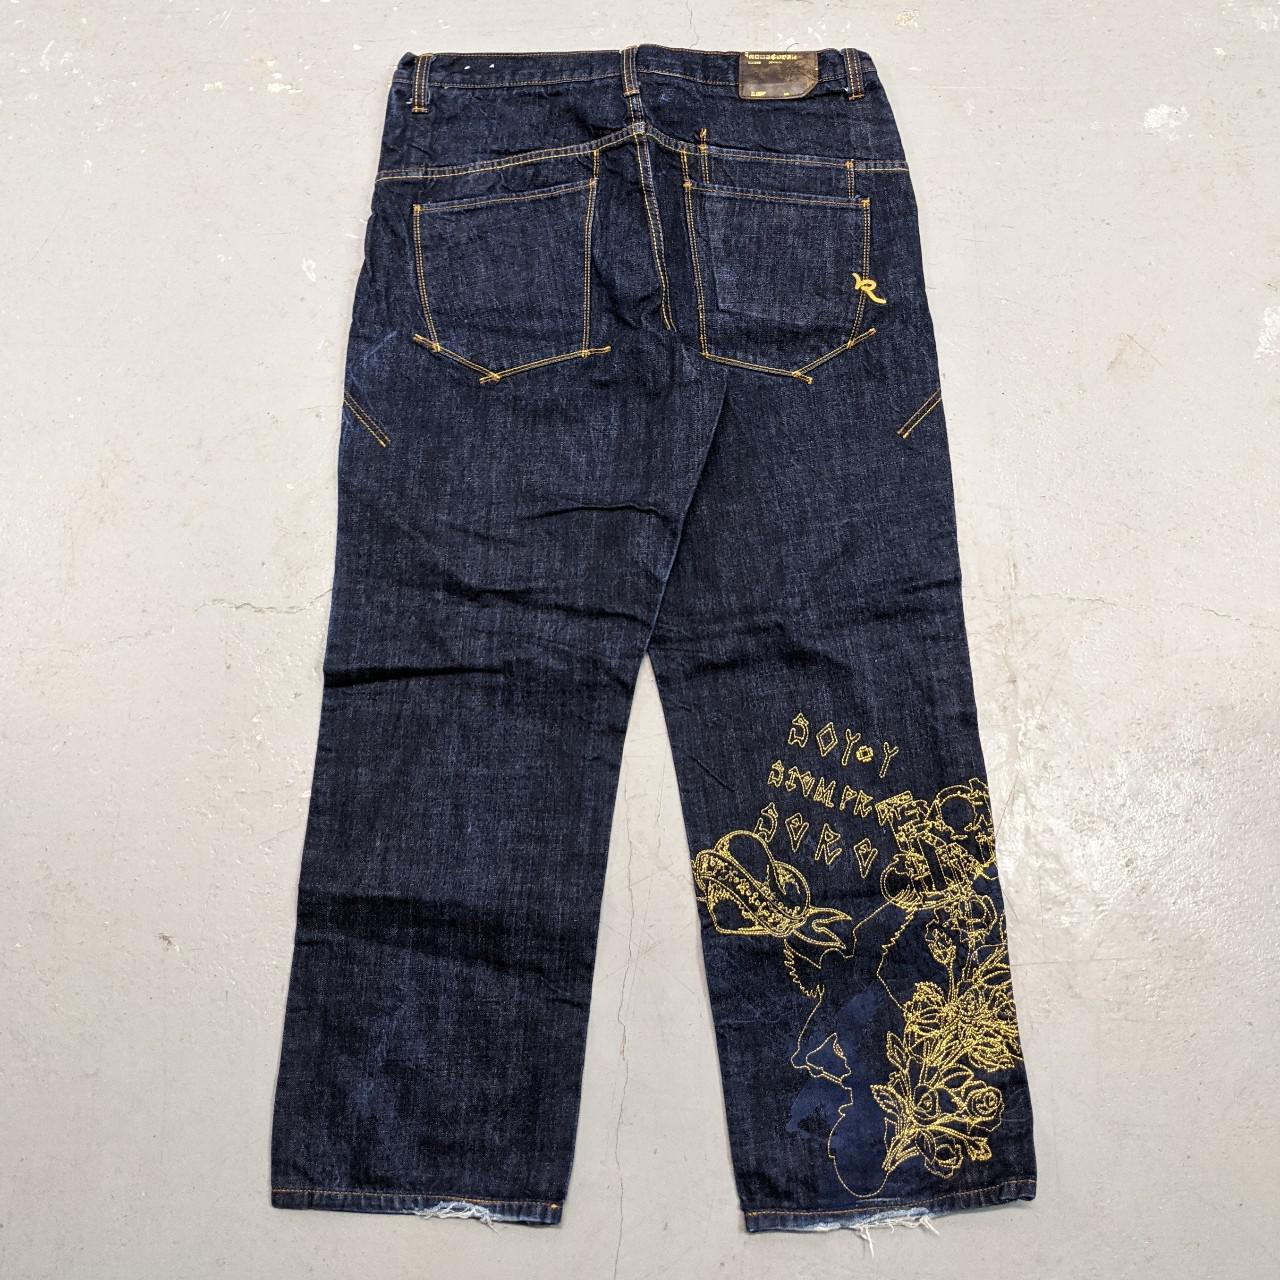 Rocawear Men's Navy and Gold Jeans